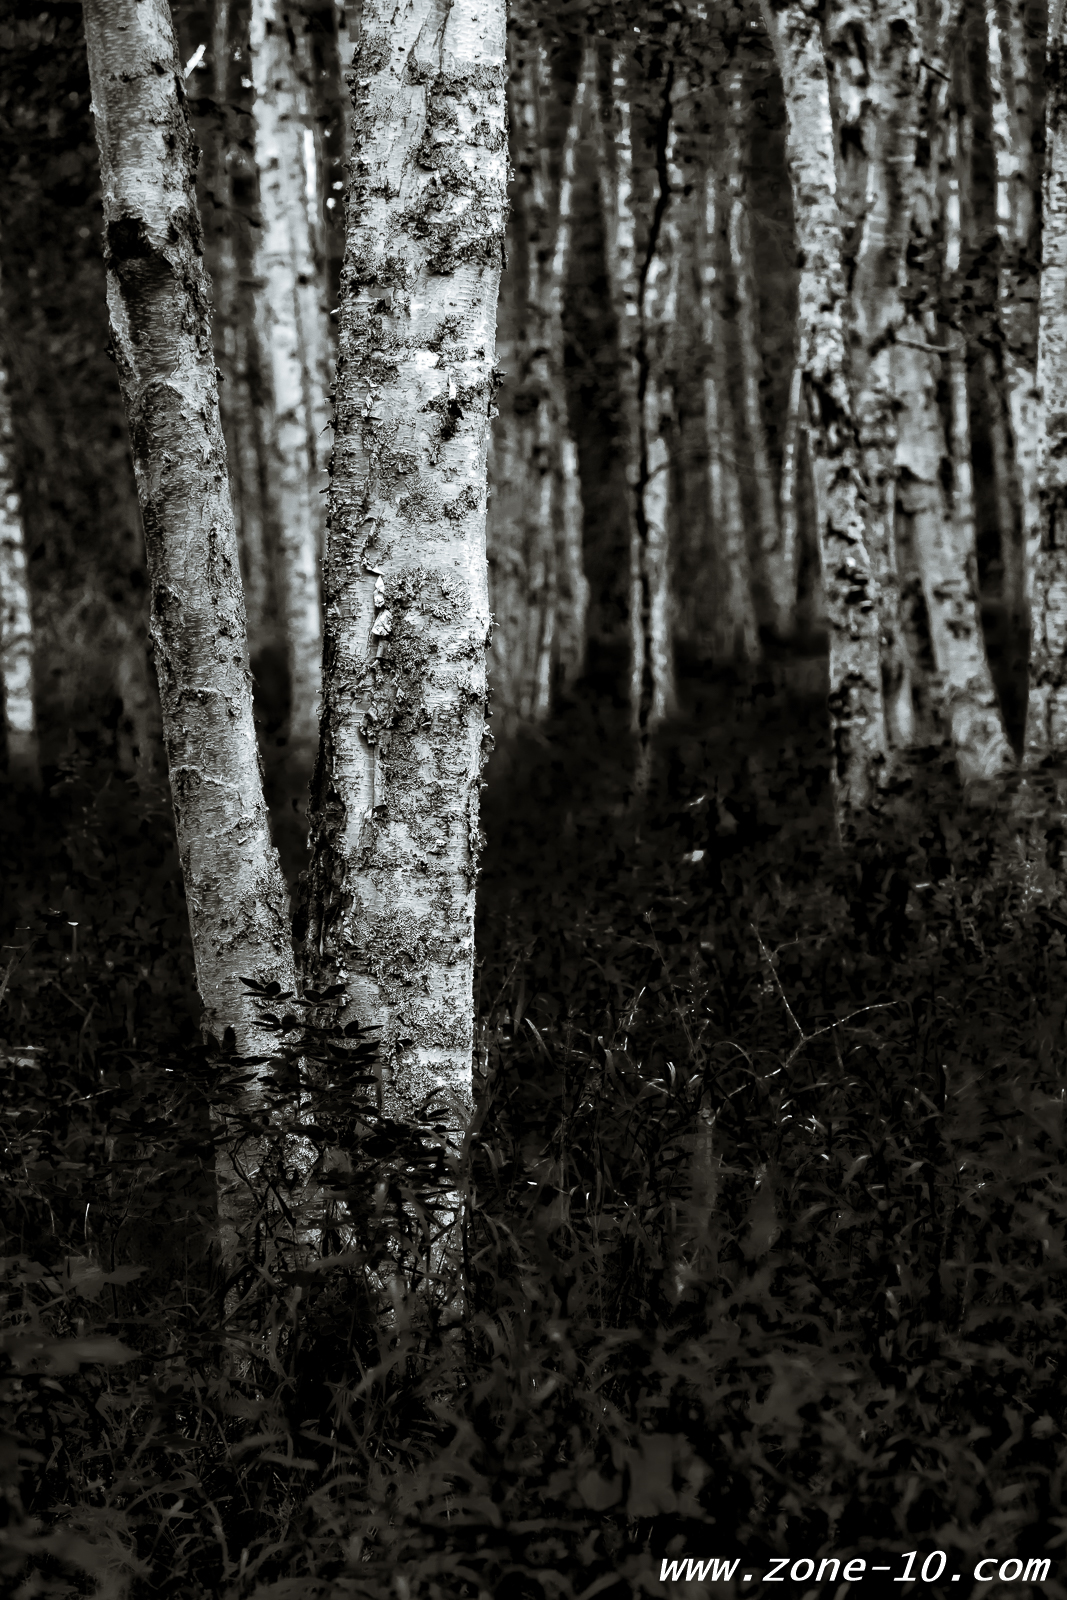 Glowing Trees. Eagle River Nature Center. Canon 6D with OM Zuiko 100/2.8 lens. Processed in Silver Efex Pro.